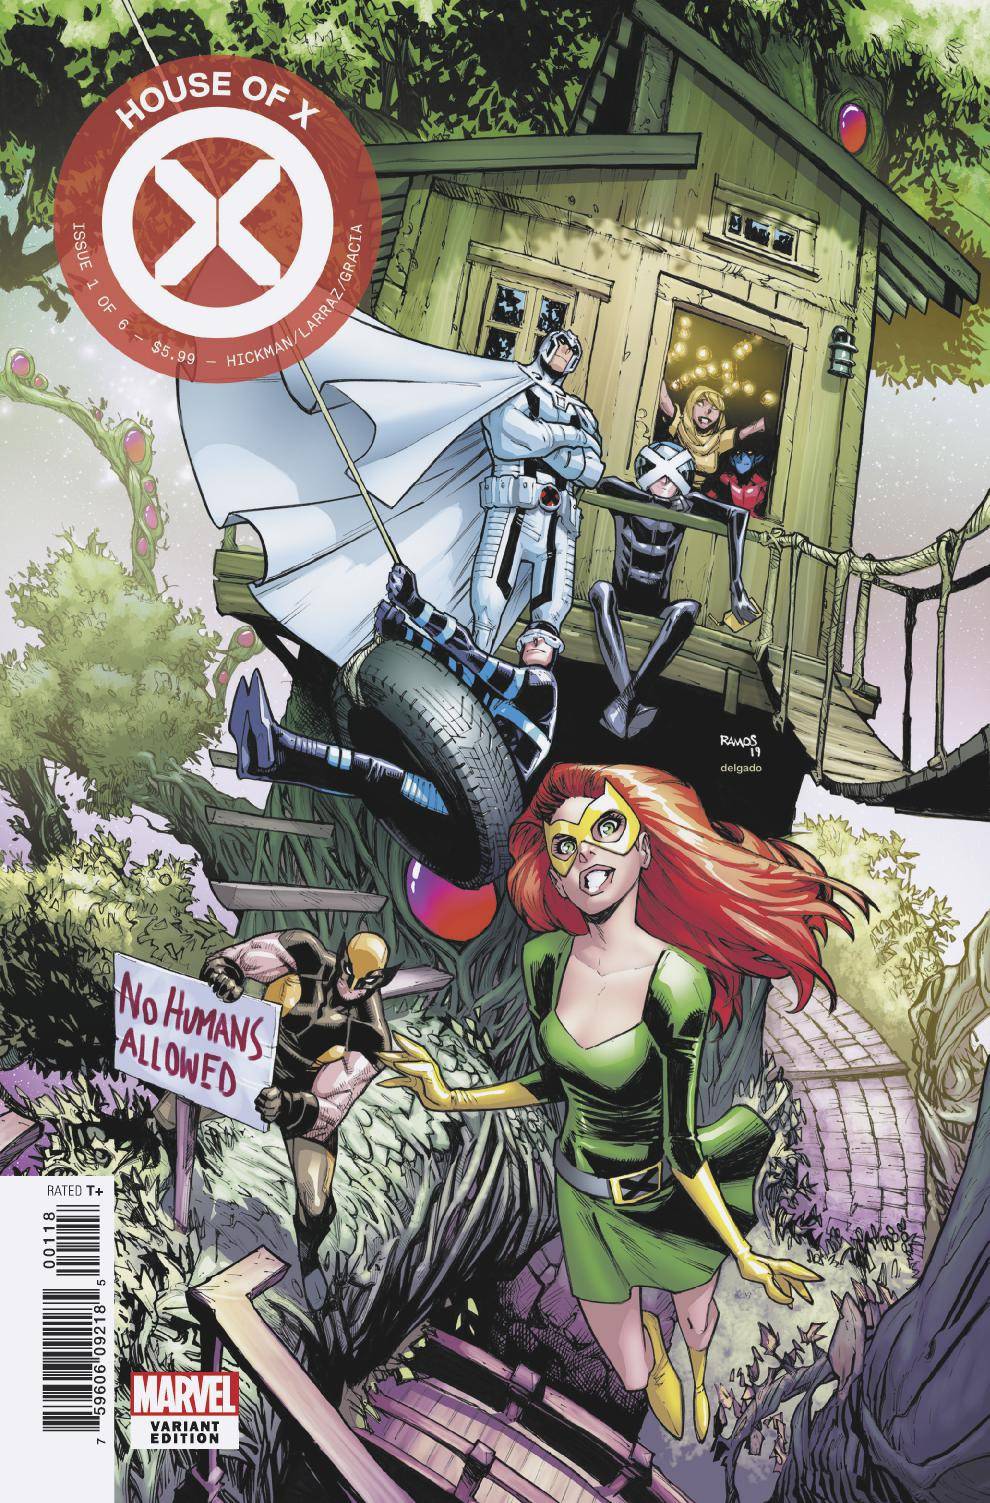 House of X #1 Ramos Party Variant (Of 6)